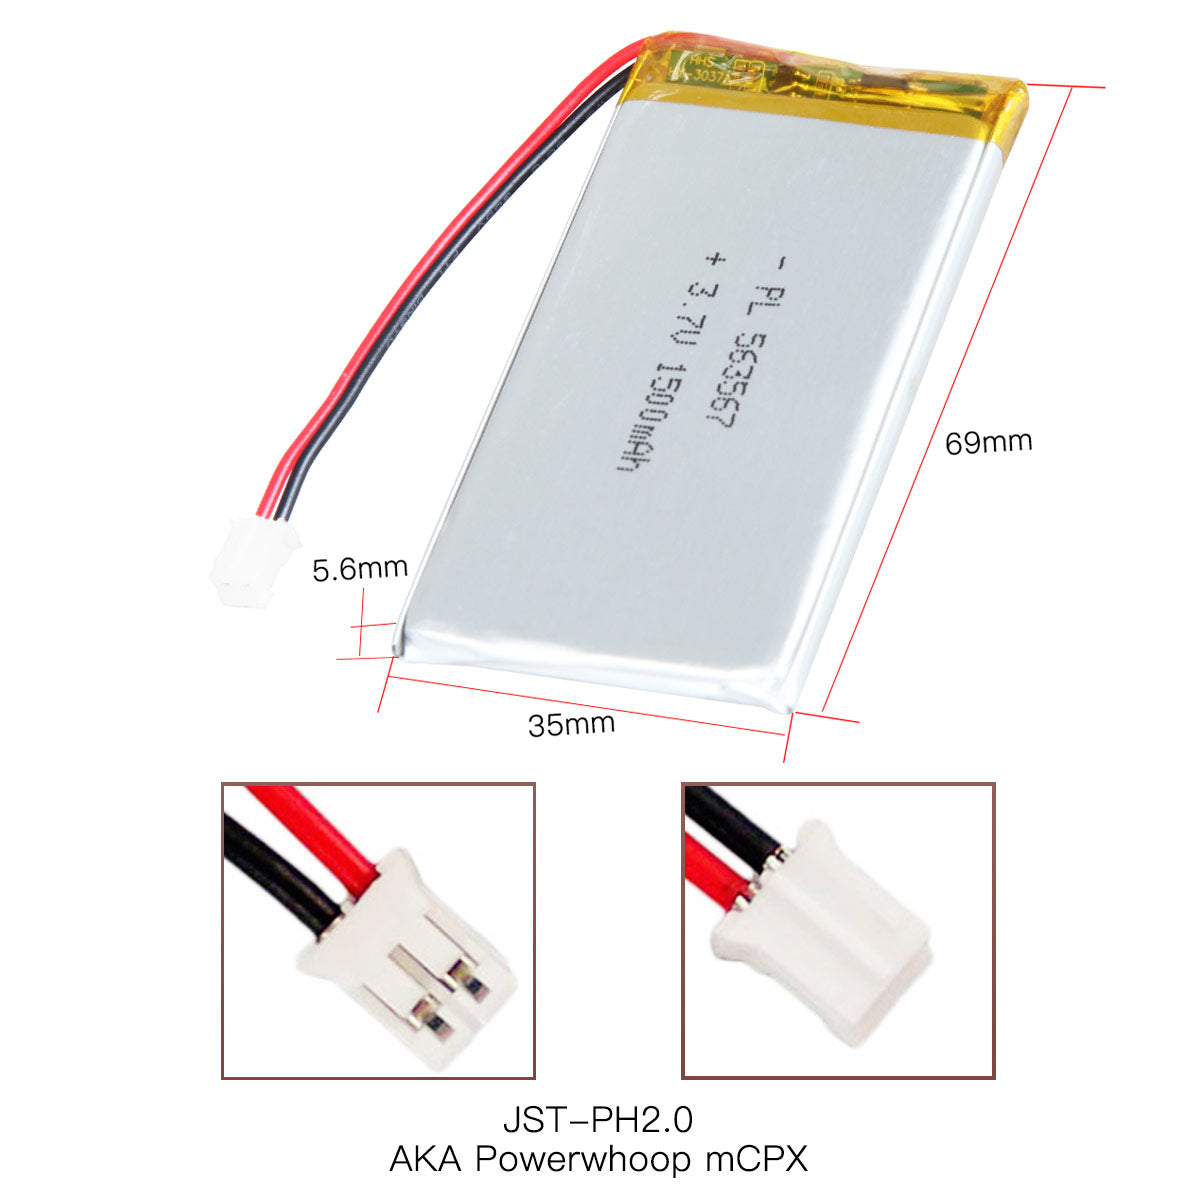 YDL 3.7V 1500mAh 563567 Rechargeable Lithium Polymer Battery Length 69mm